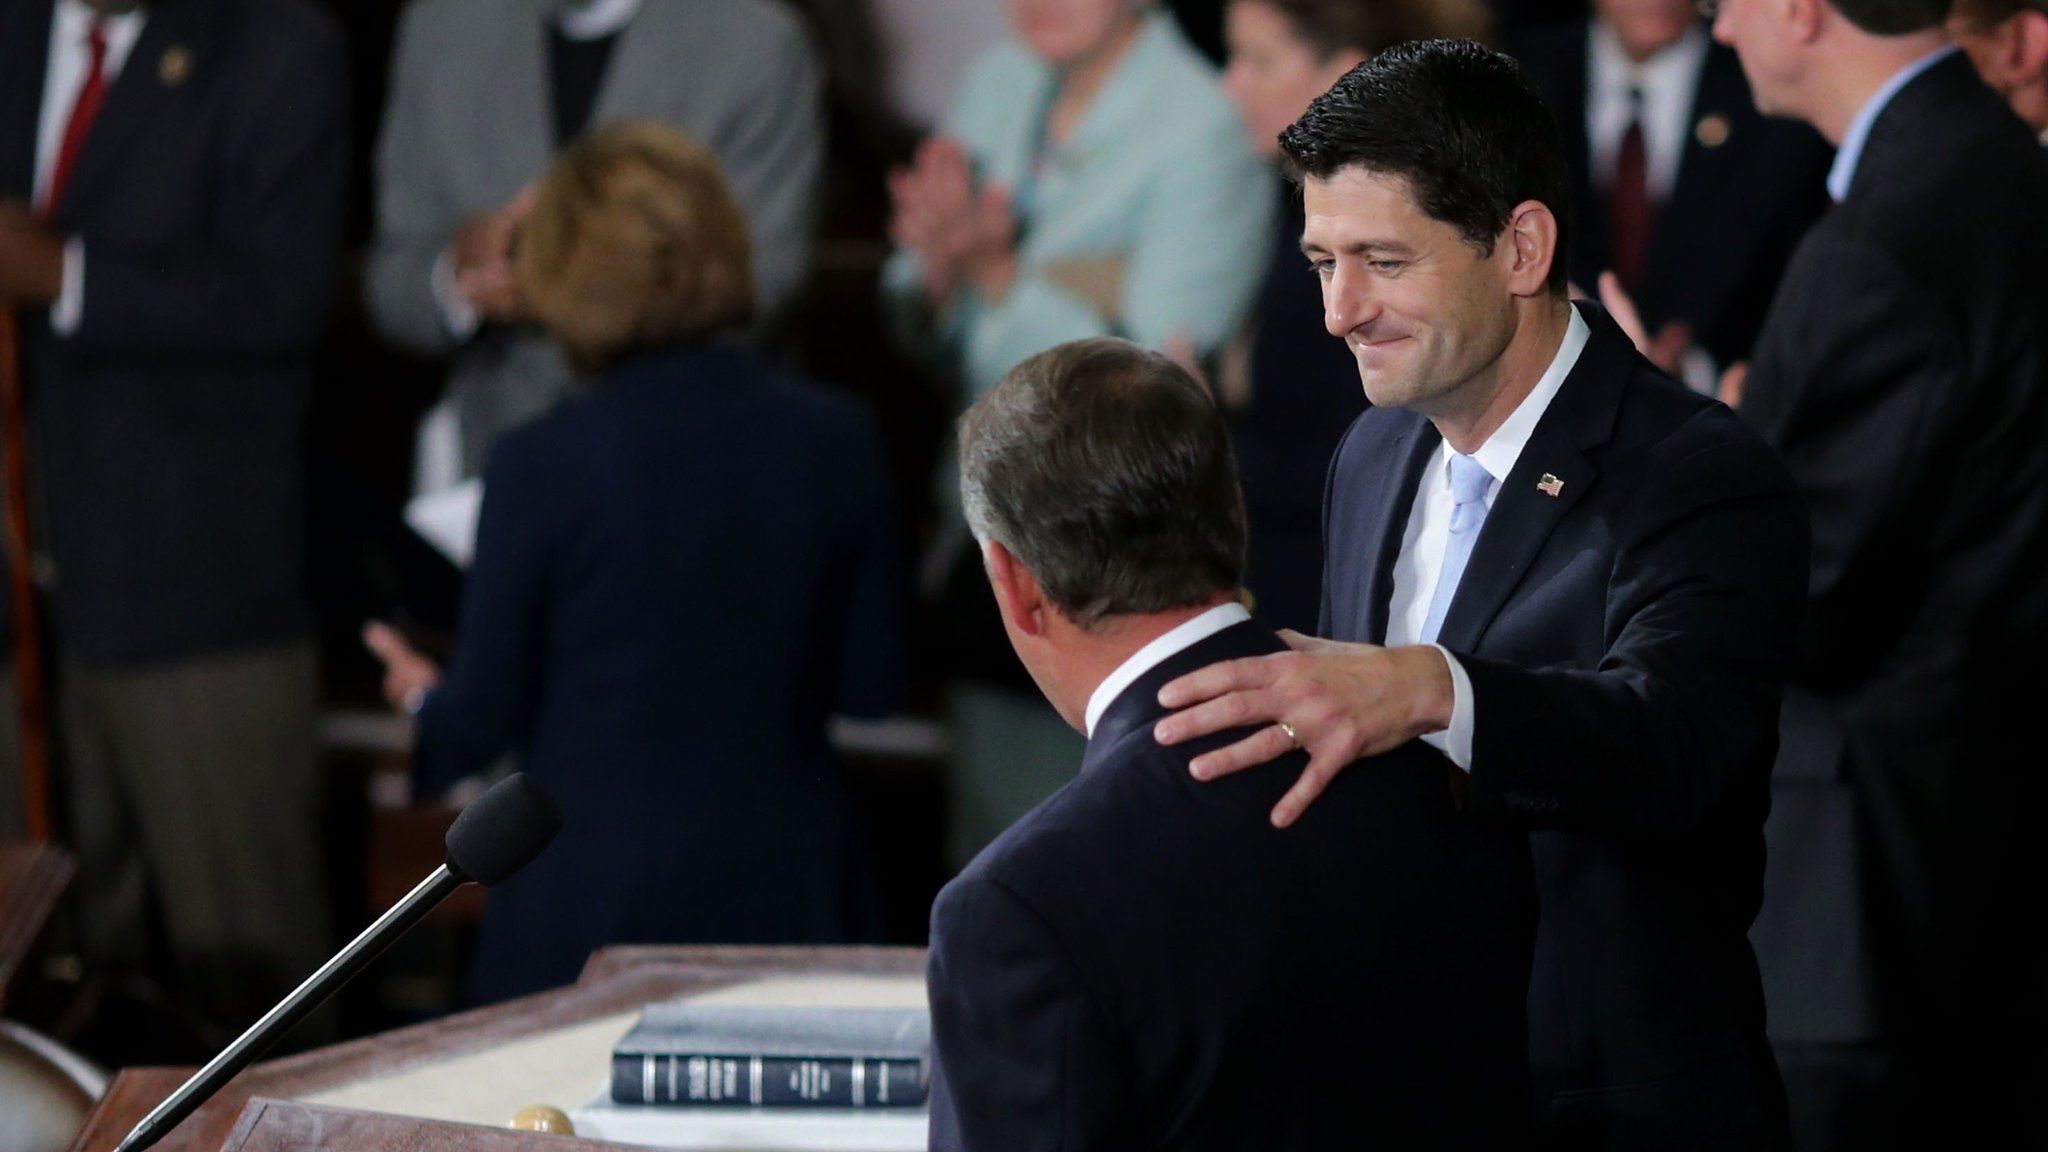 Speaker-elect of the House Paul Ryan (R-WI) shakes hands with outgoing U.S. Speaker of the House Rep. John Boehner (R-OH) in the House of Representatives chamber at the U.S. Capitol October 29, 2015